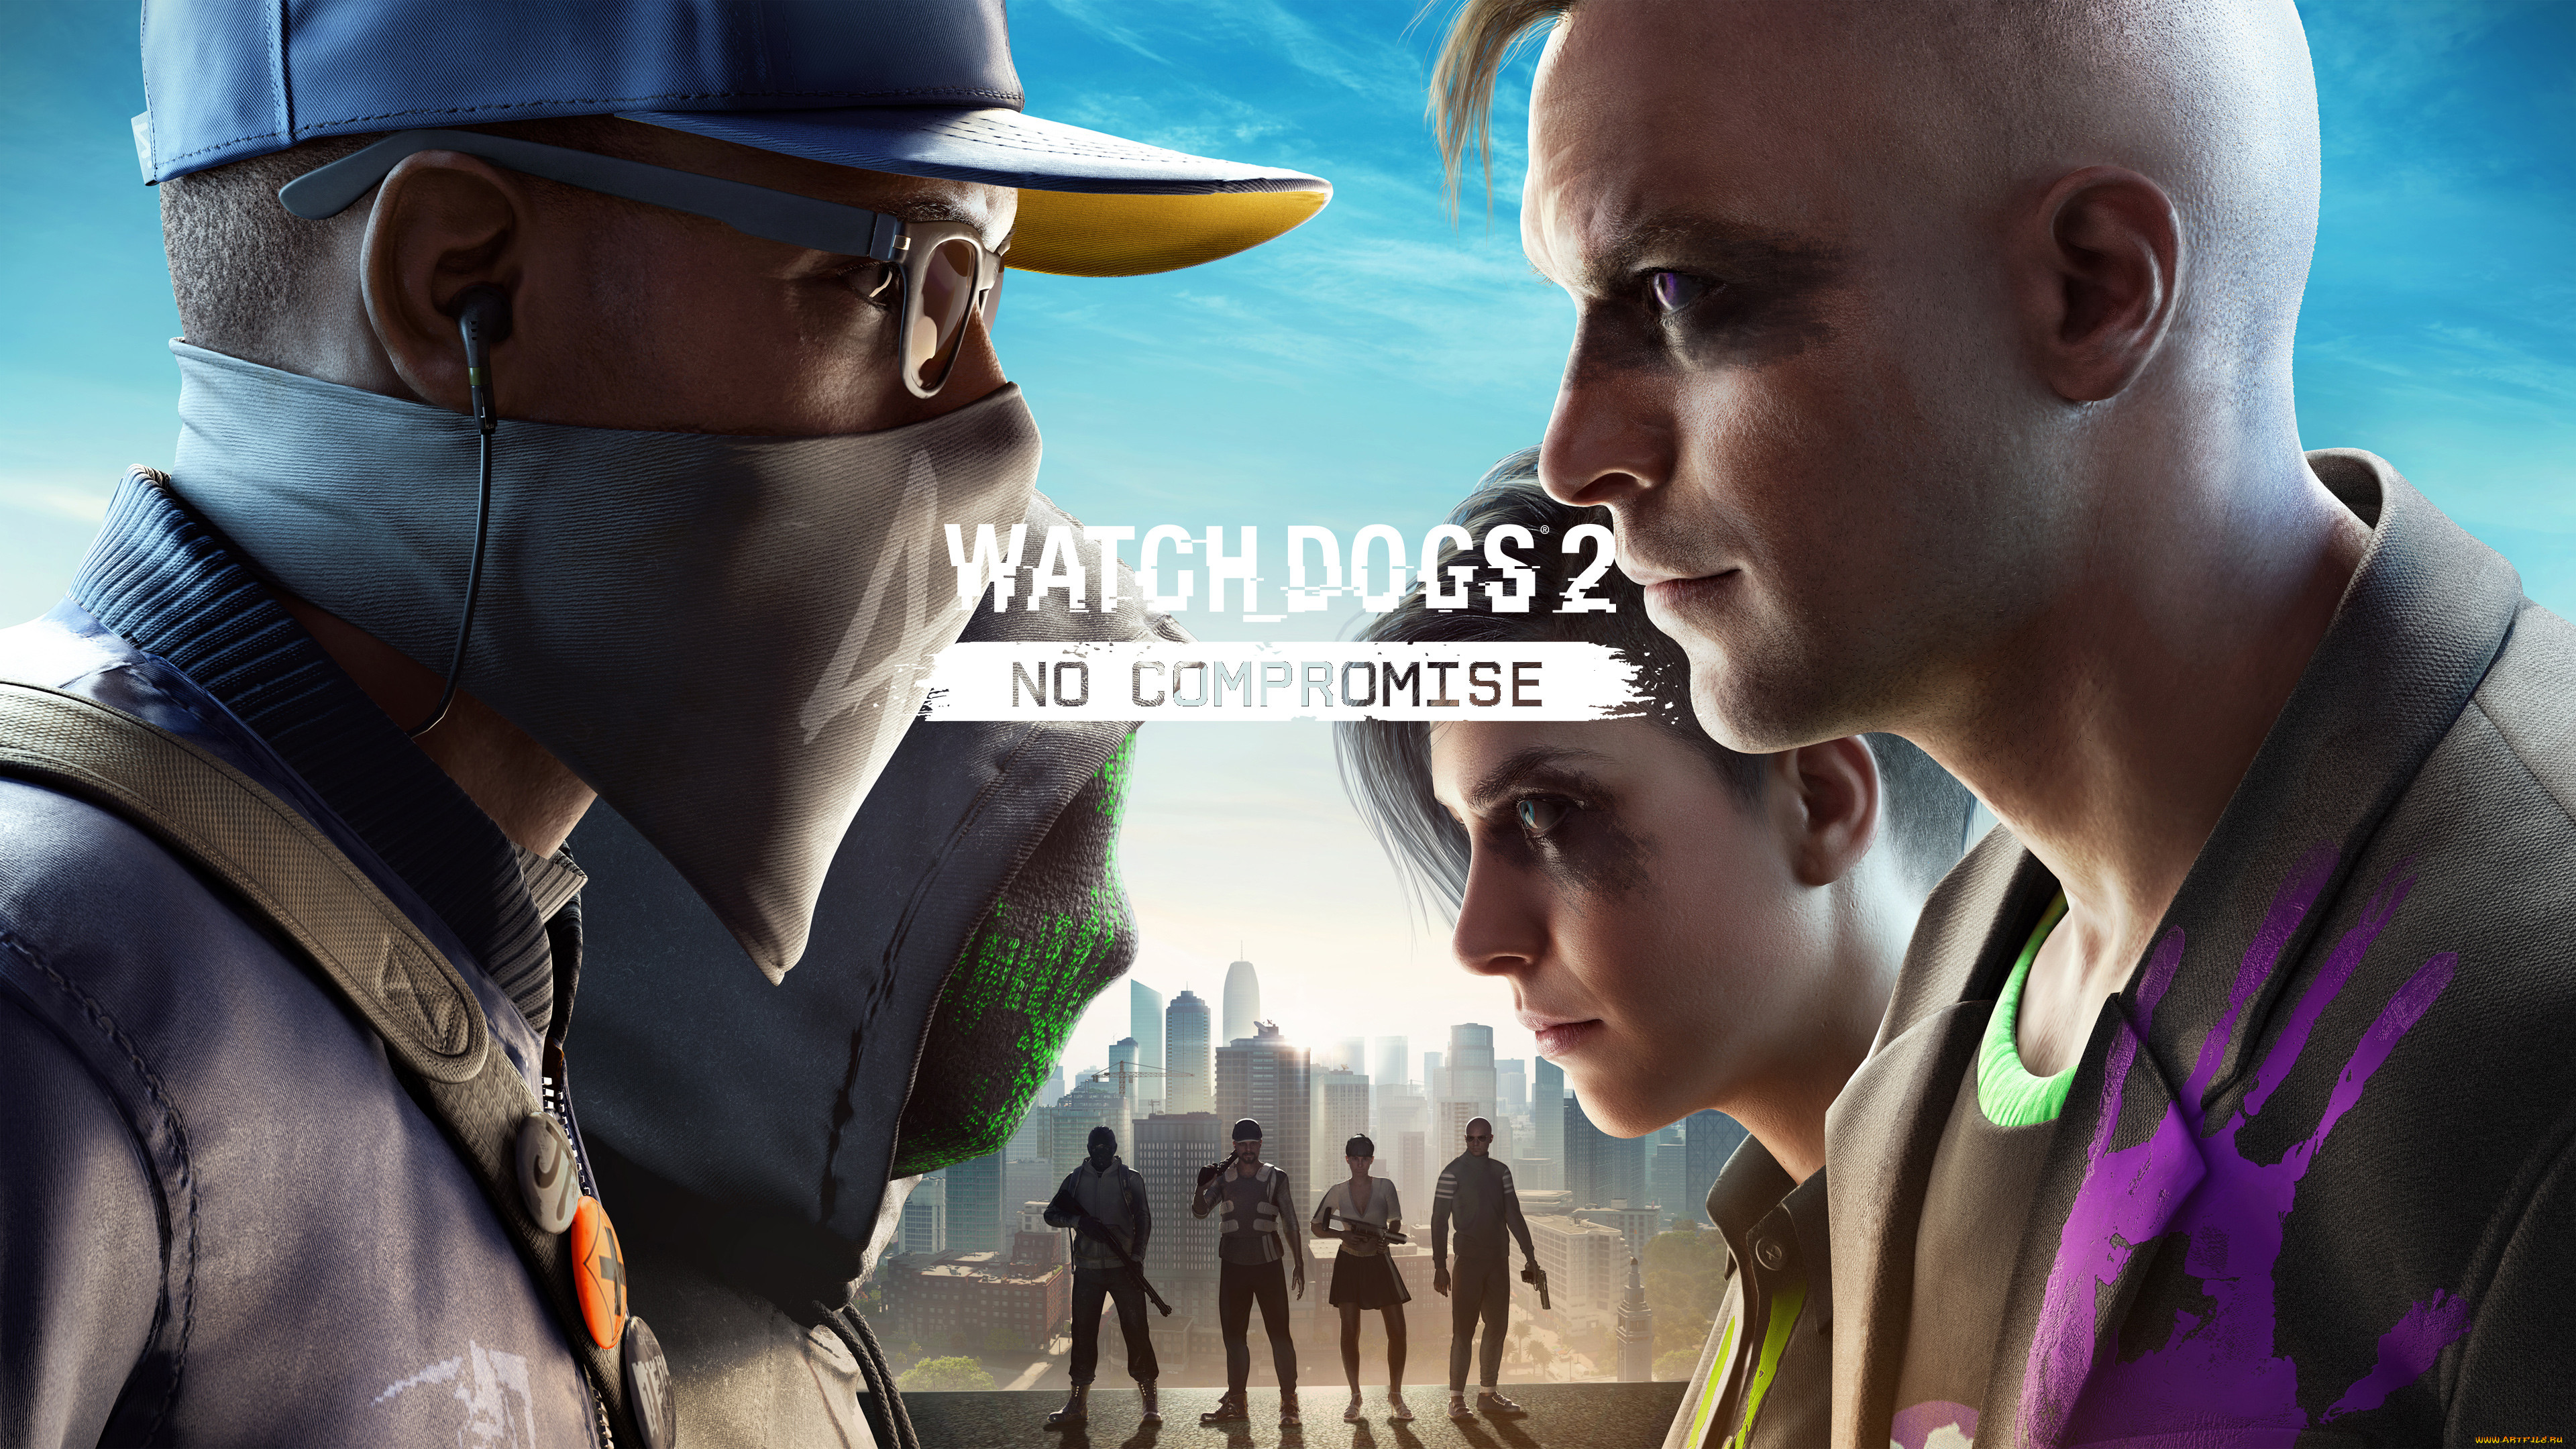  , watch dogs 2, action, watch, dogs, 2, 